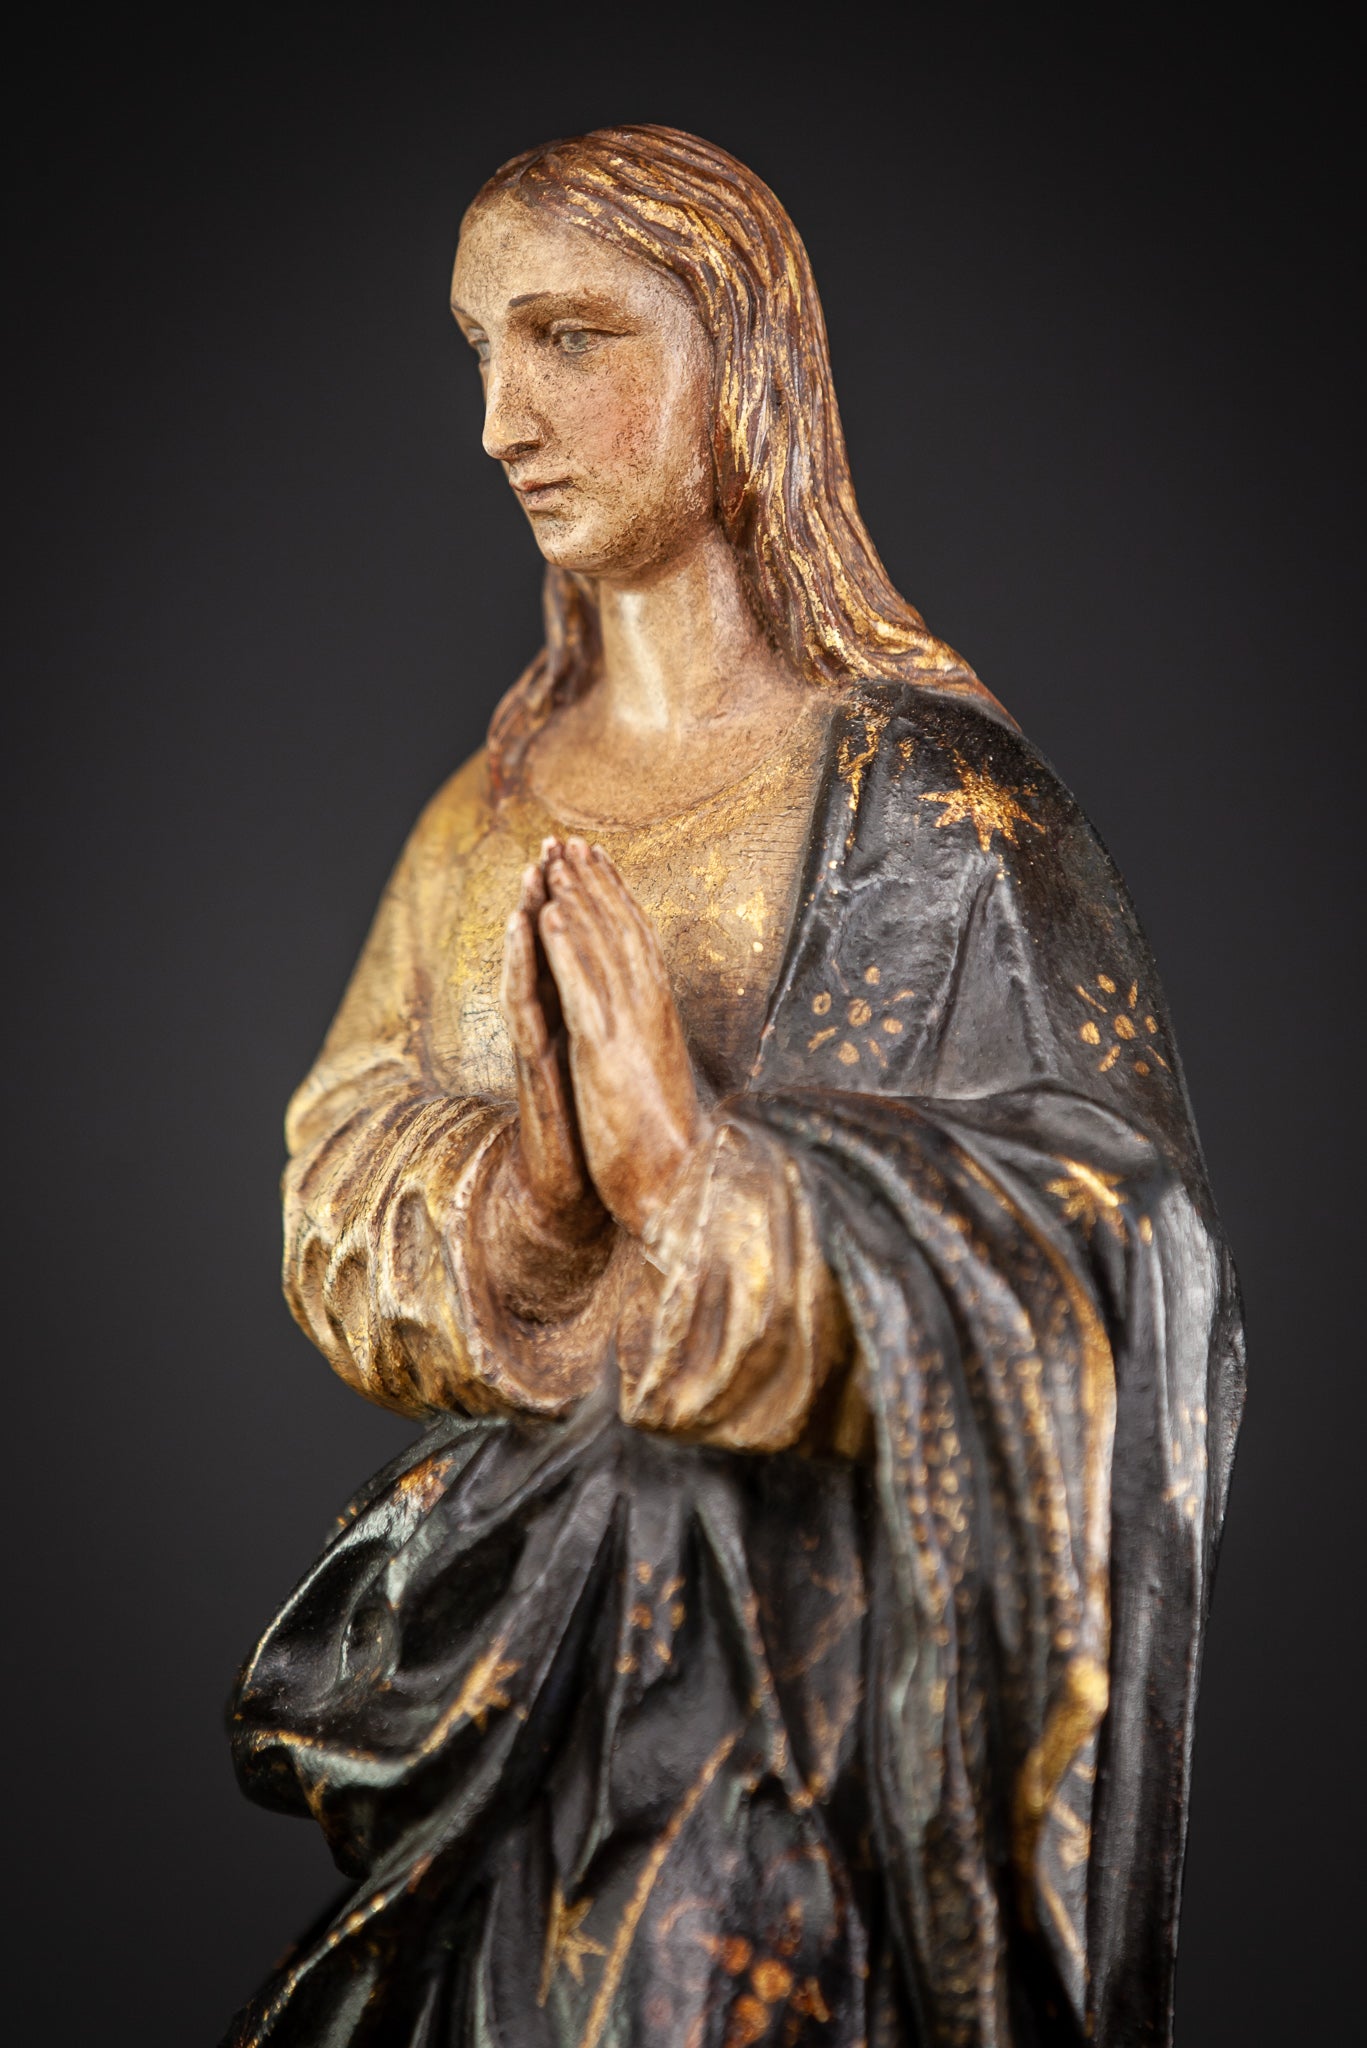 Virgin Mary Immaculate Conception 17th Century Wood 21"